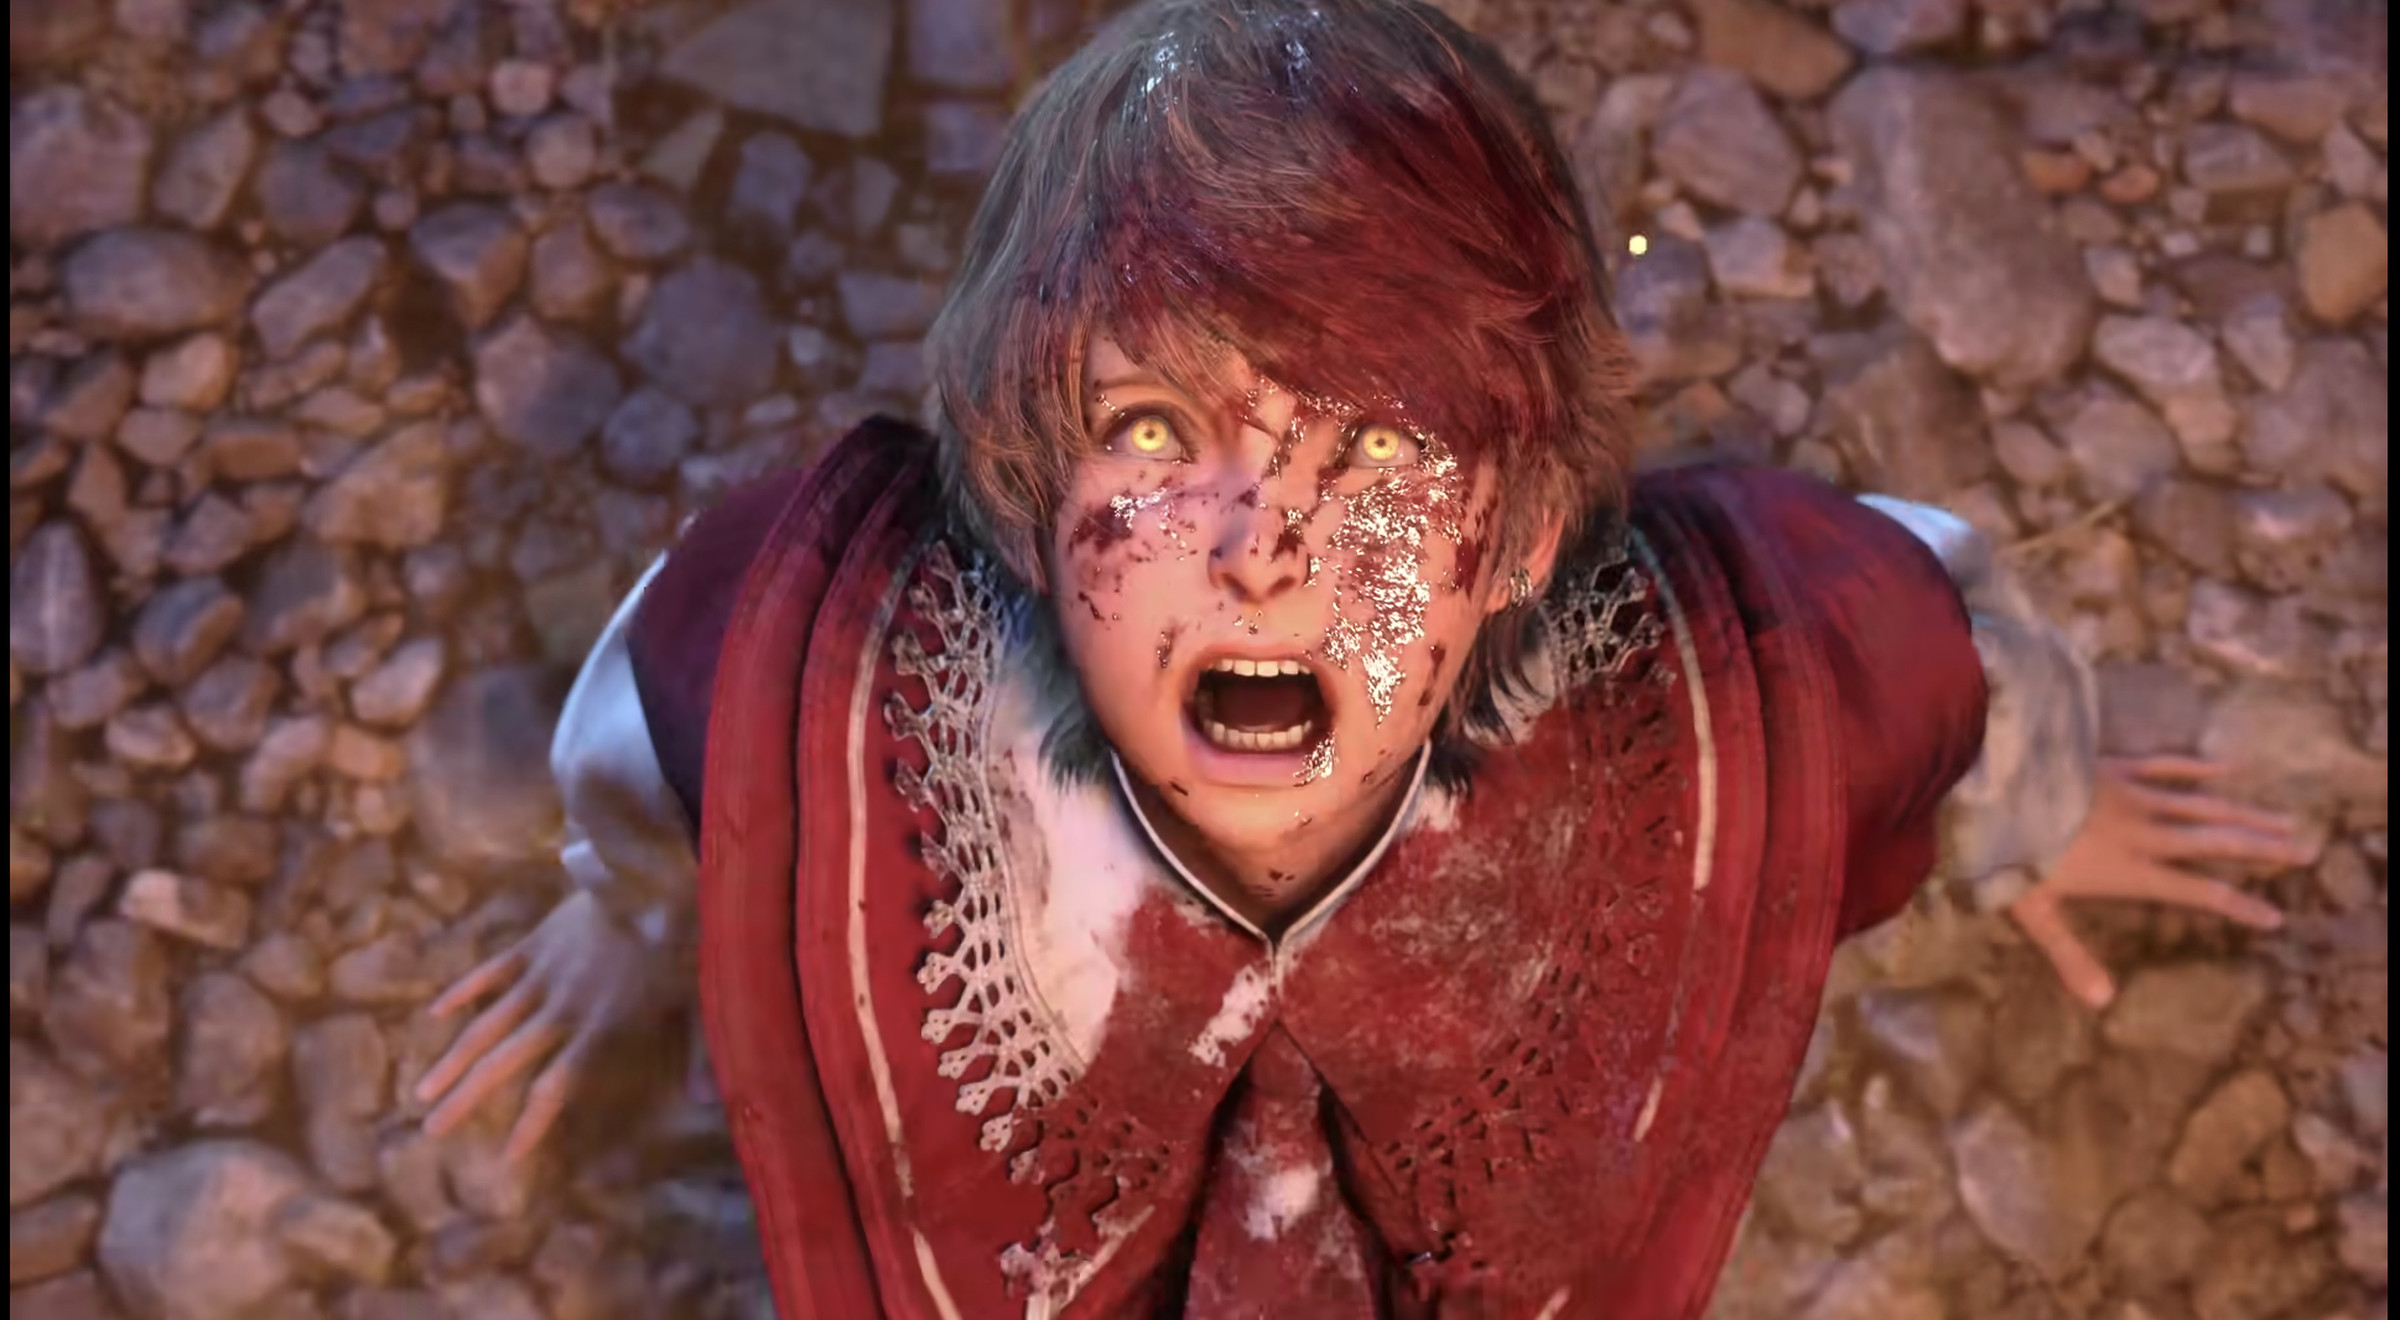 Screenshot from Final Fantasy XVI trailer featuring a young boy who’s face is covered with blood